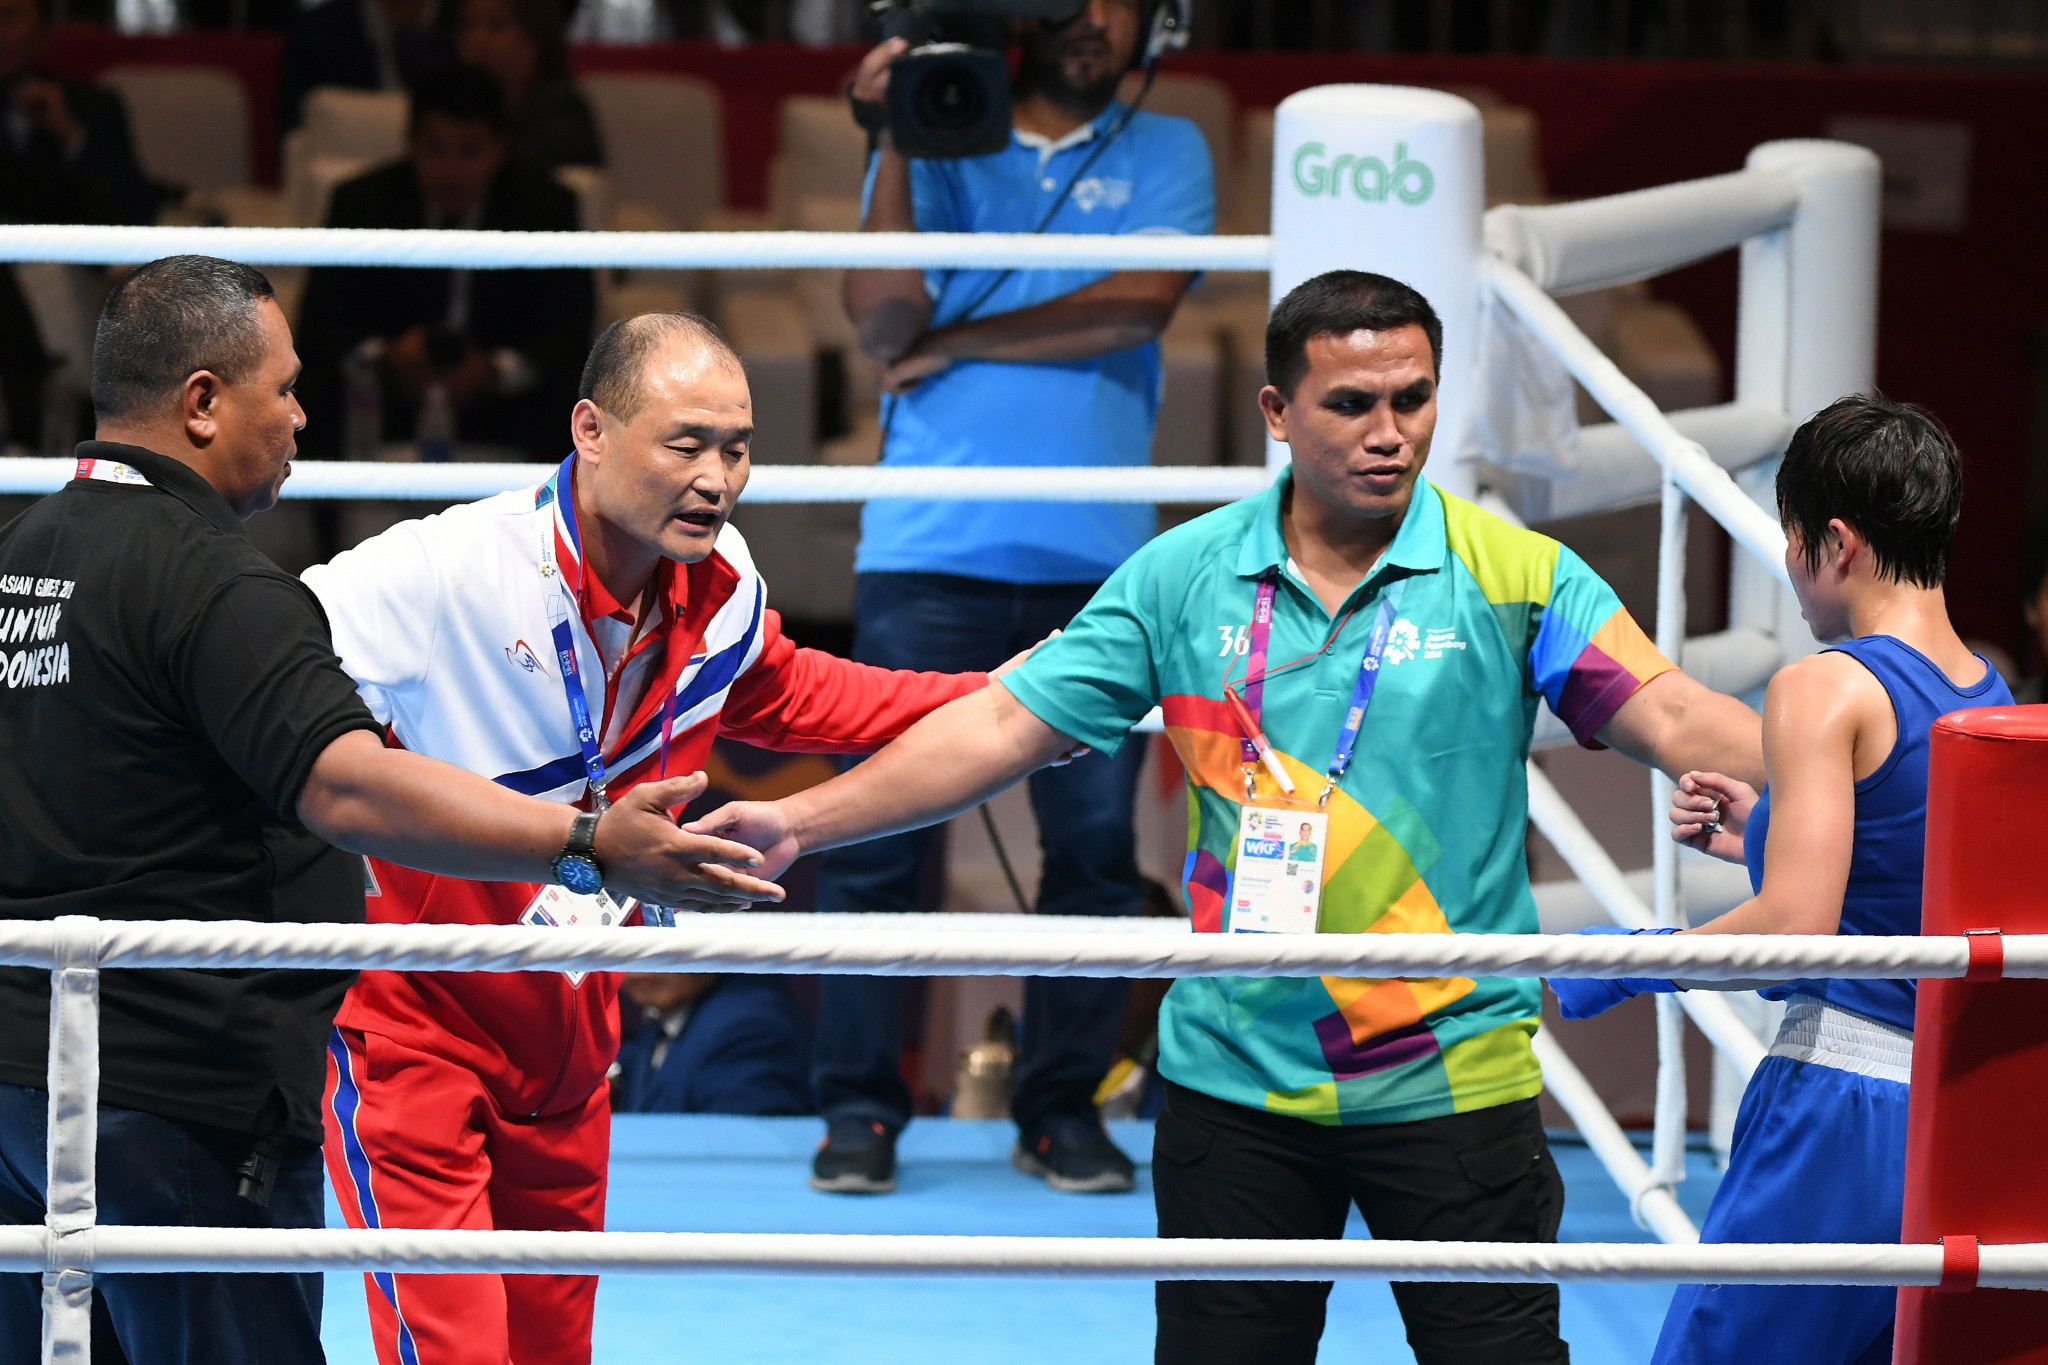 North Korean coach Pak Chol Jun protests in the ring at the Asian Games ©Getty Images